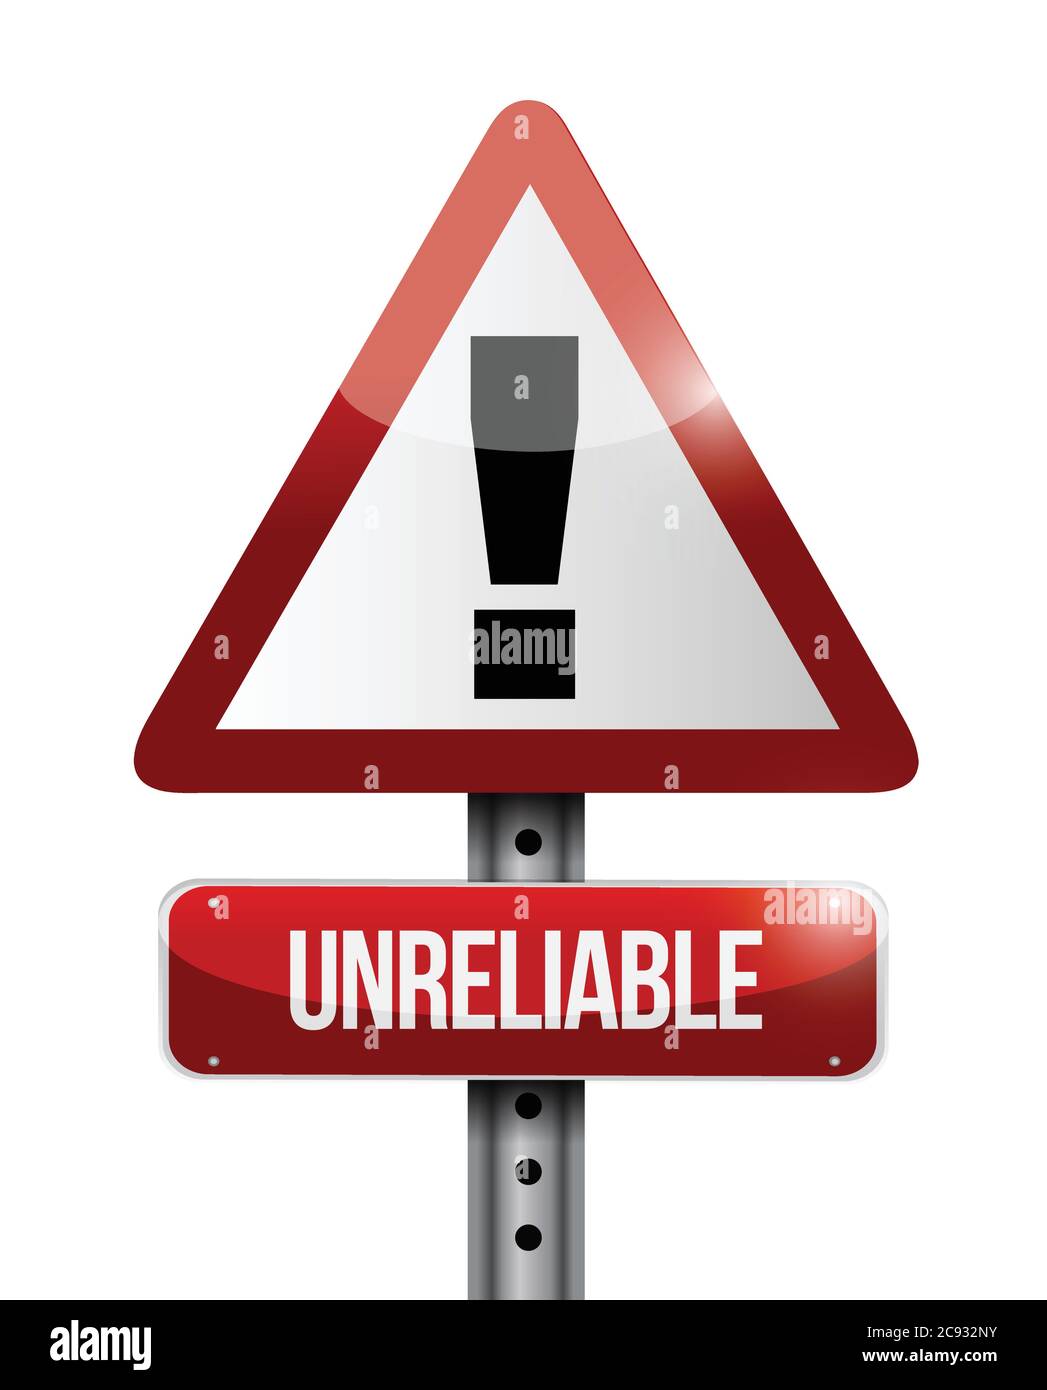 Unreliable warning road sign illustration design over a white background Stock Vector